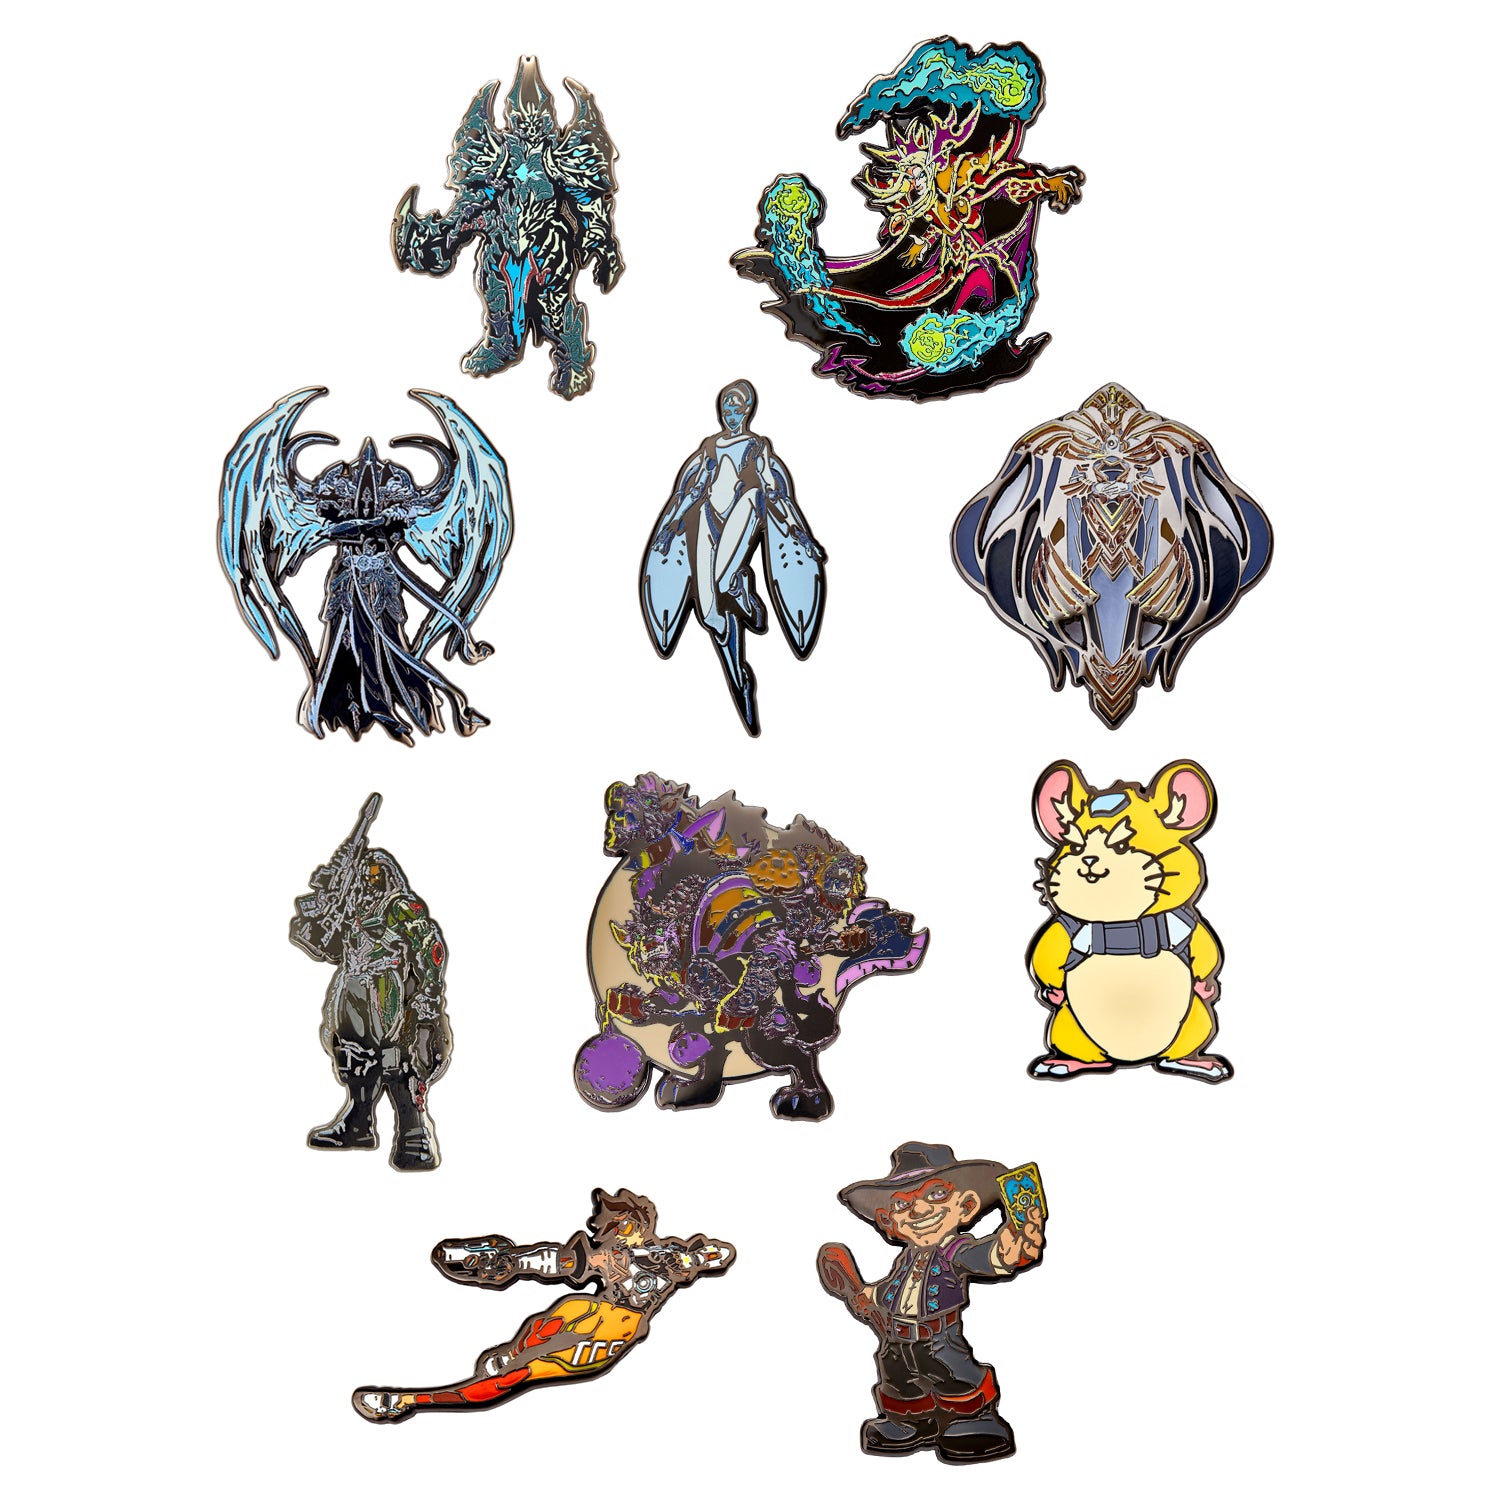 All the pins in the Blizzard Series 8 Blind Pack 5-Piece Pin Set